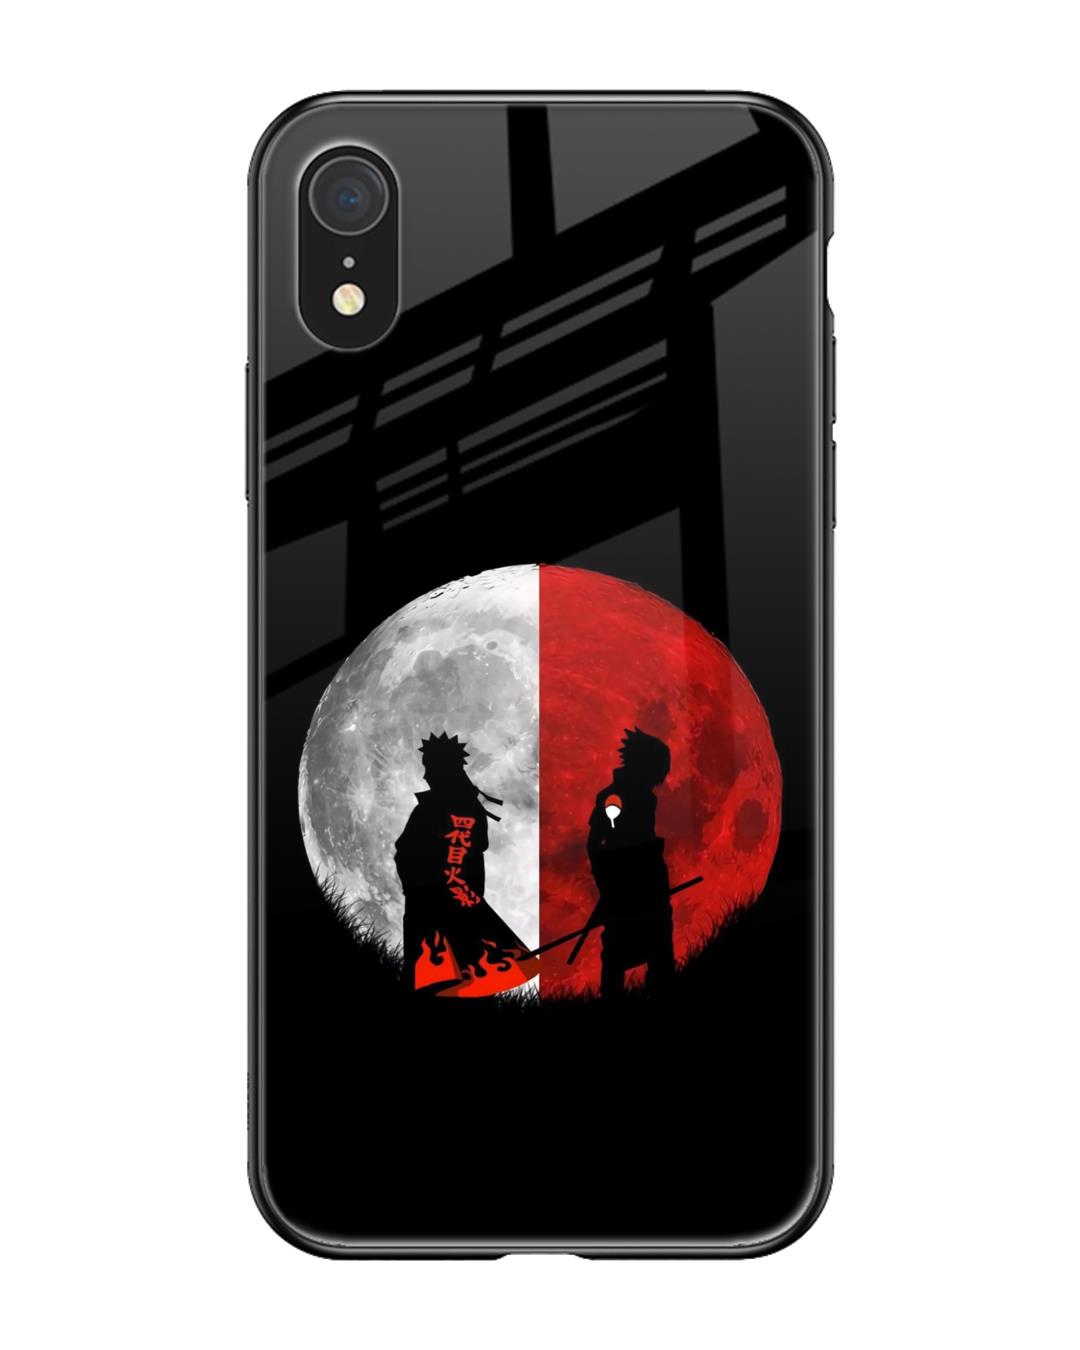 Orange for iPhone XR Back Cover Anime OnePiece Luffy Side design Soft Case  Liquid Silicone Phone Cases Buy Online at Best Prices in SriLanka   Darazlk